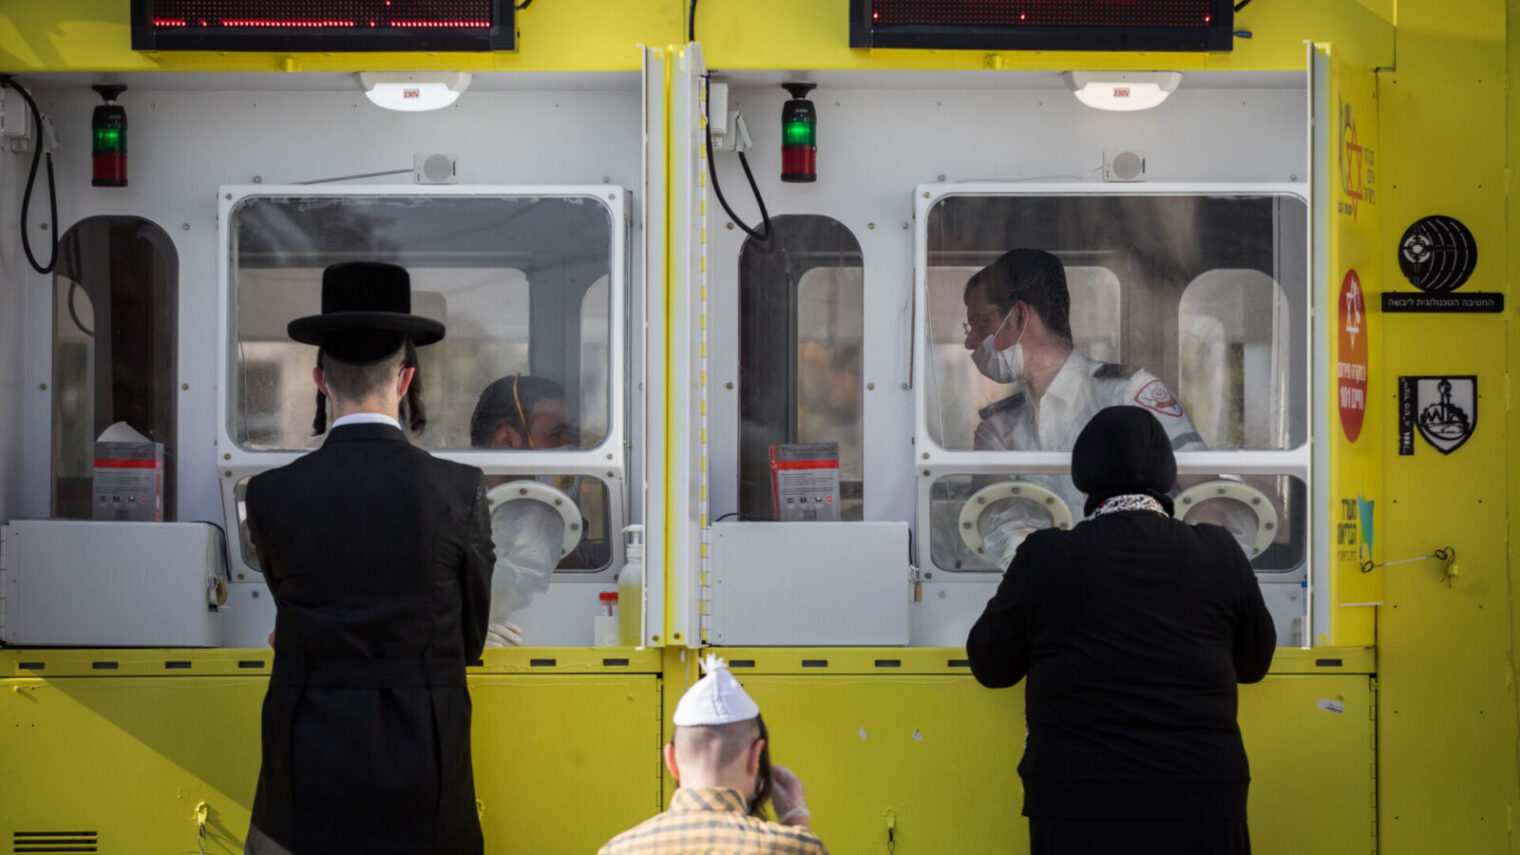 Magen David Adom testers perform Covid-19 tests in Jerusalem at a contact-free mobile testing station built by the IDF Technology and Logistics Division, April 16, 2020. Photo by Nati Shohat/Flash90